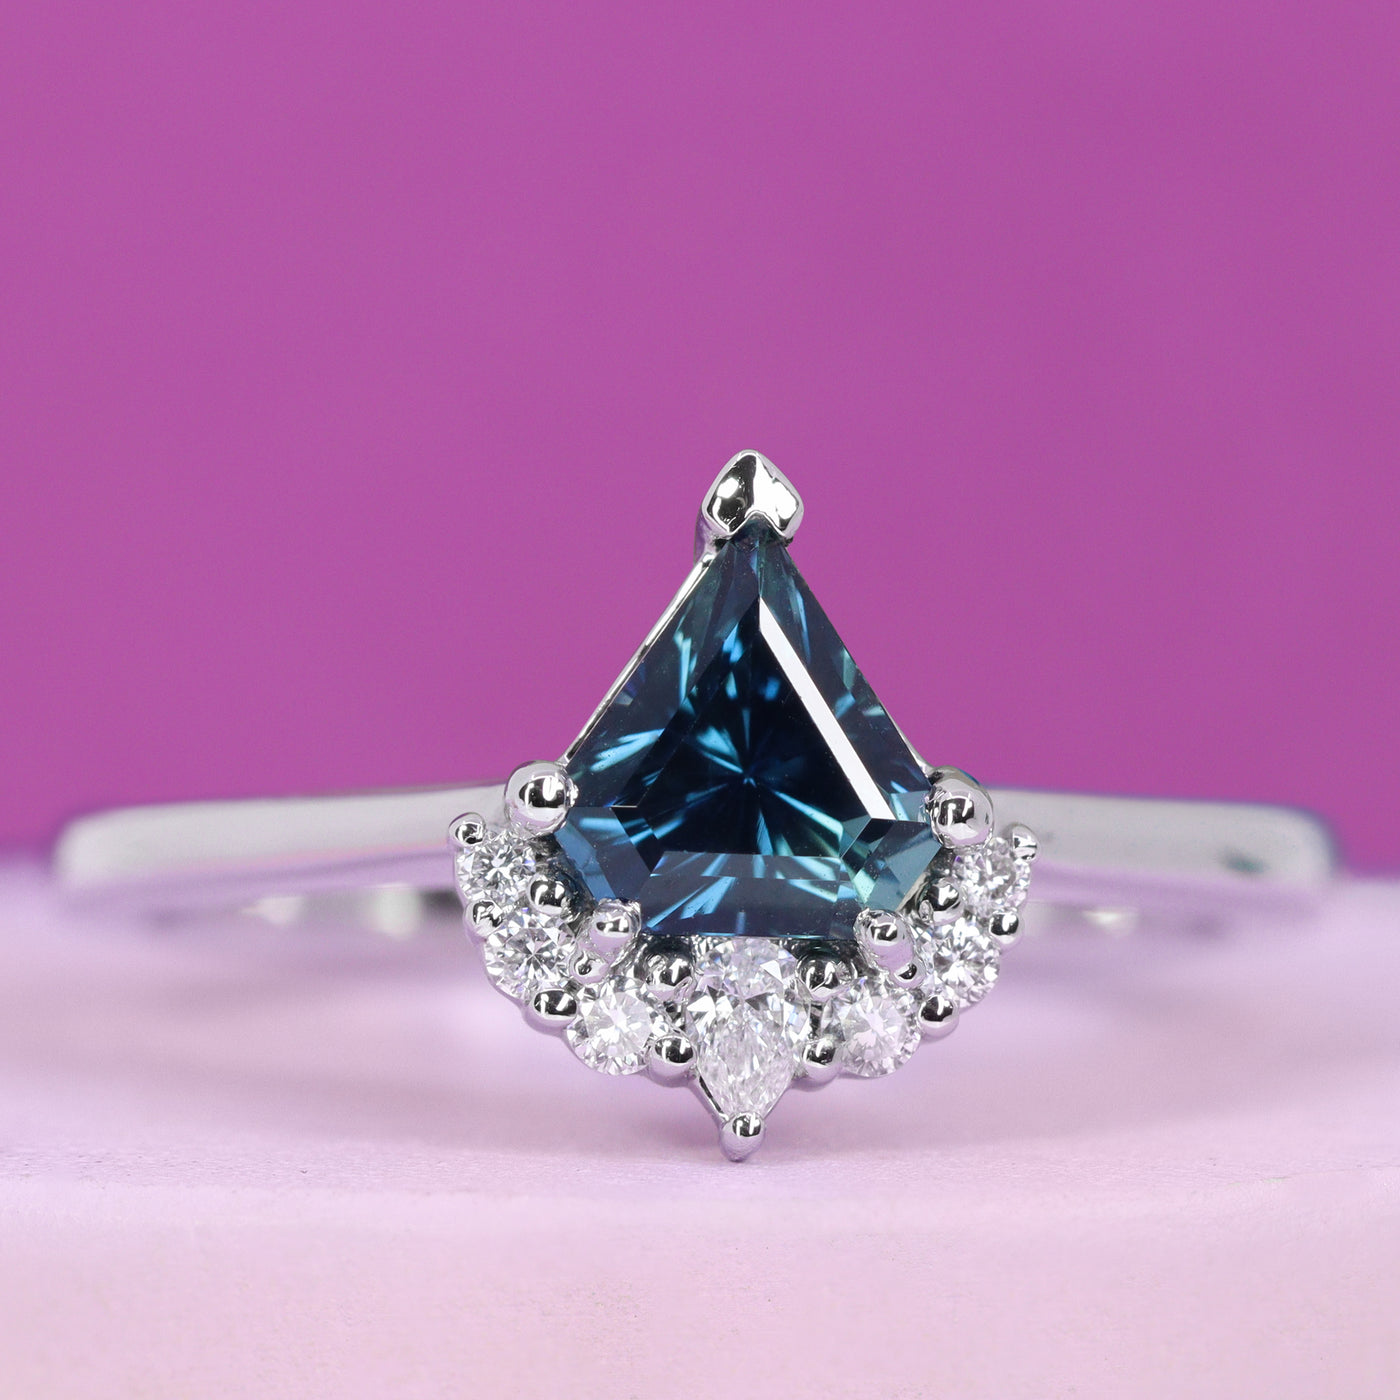 Celeste - Shield Cut Blue Sapphire Ring with Diamond Crown - Custom Made-to-Order Design